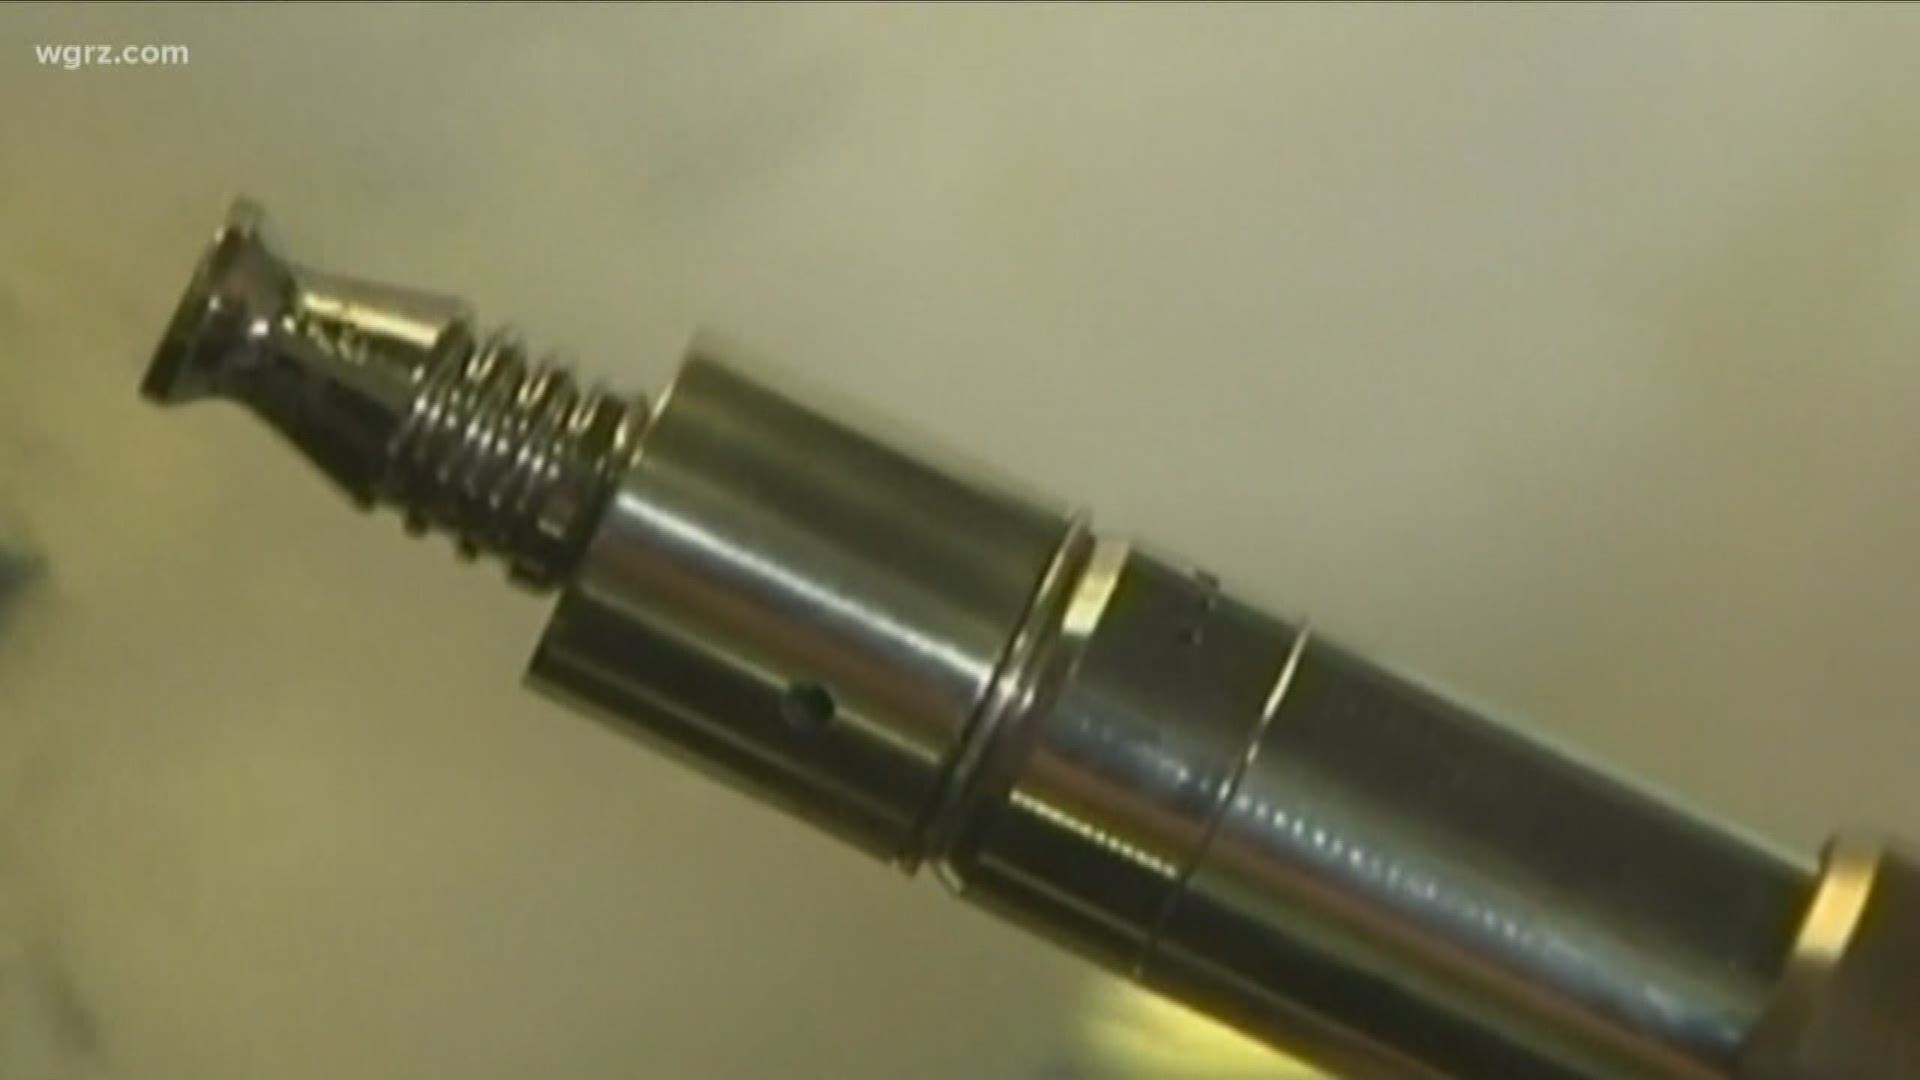 Text program to help NYS teens quit vaping